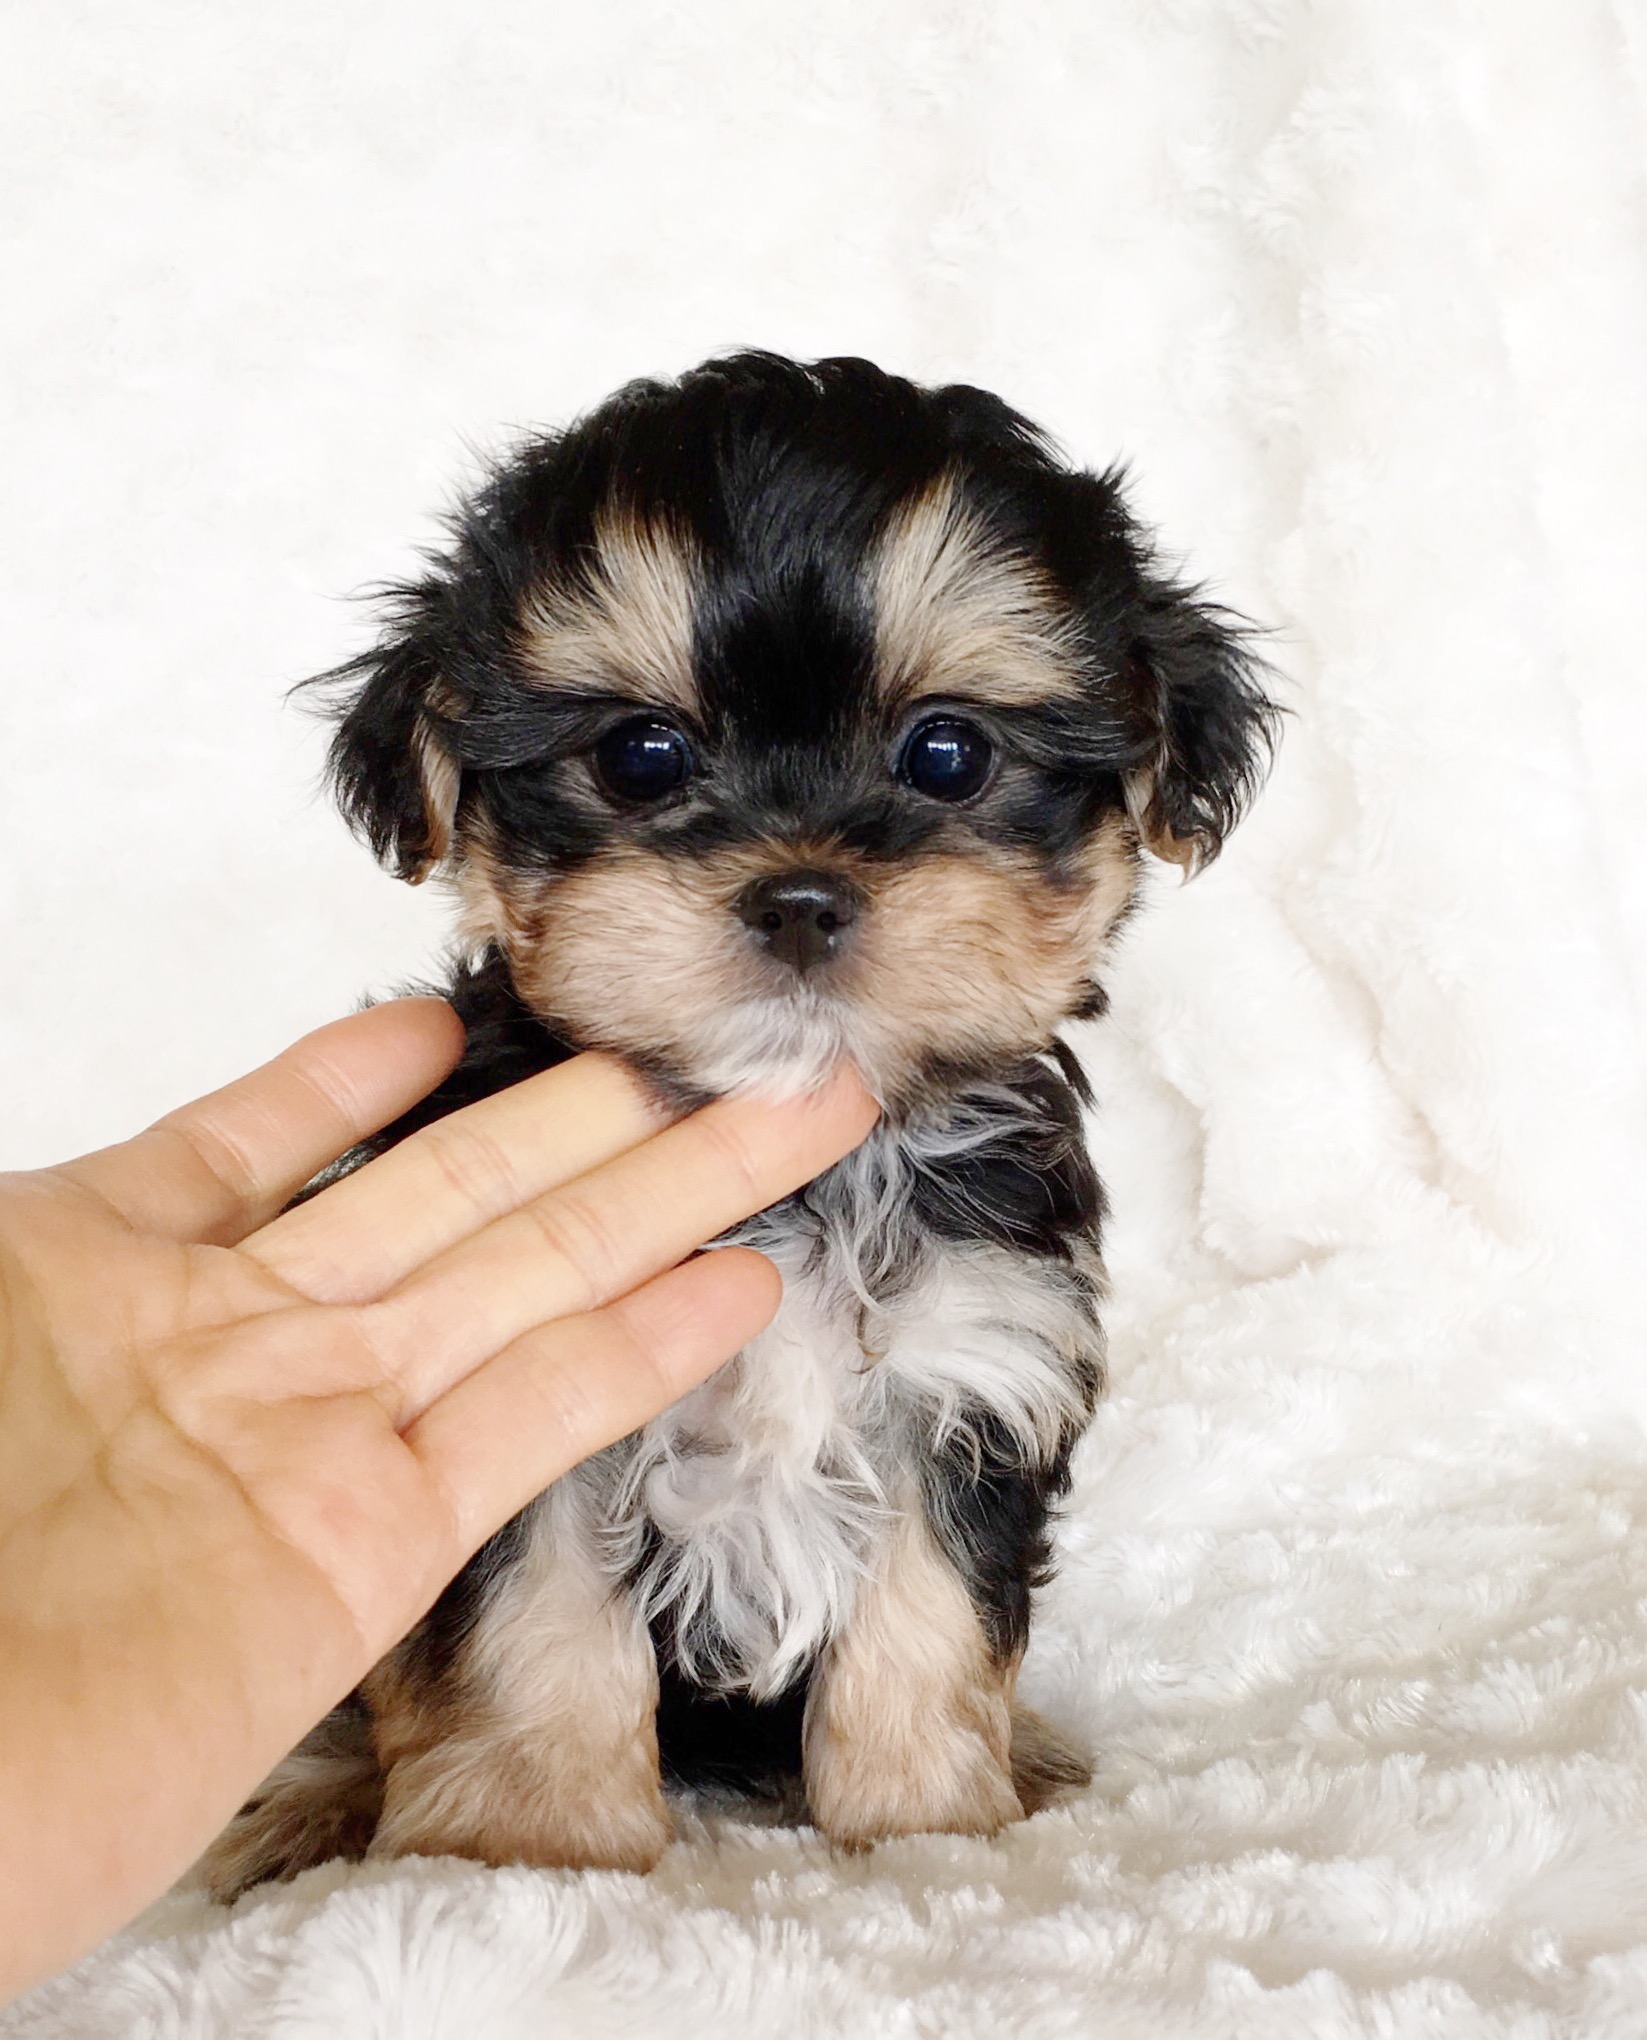 Teacup Morkie Puppy for sale! Cobby and 